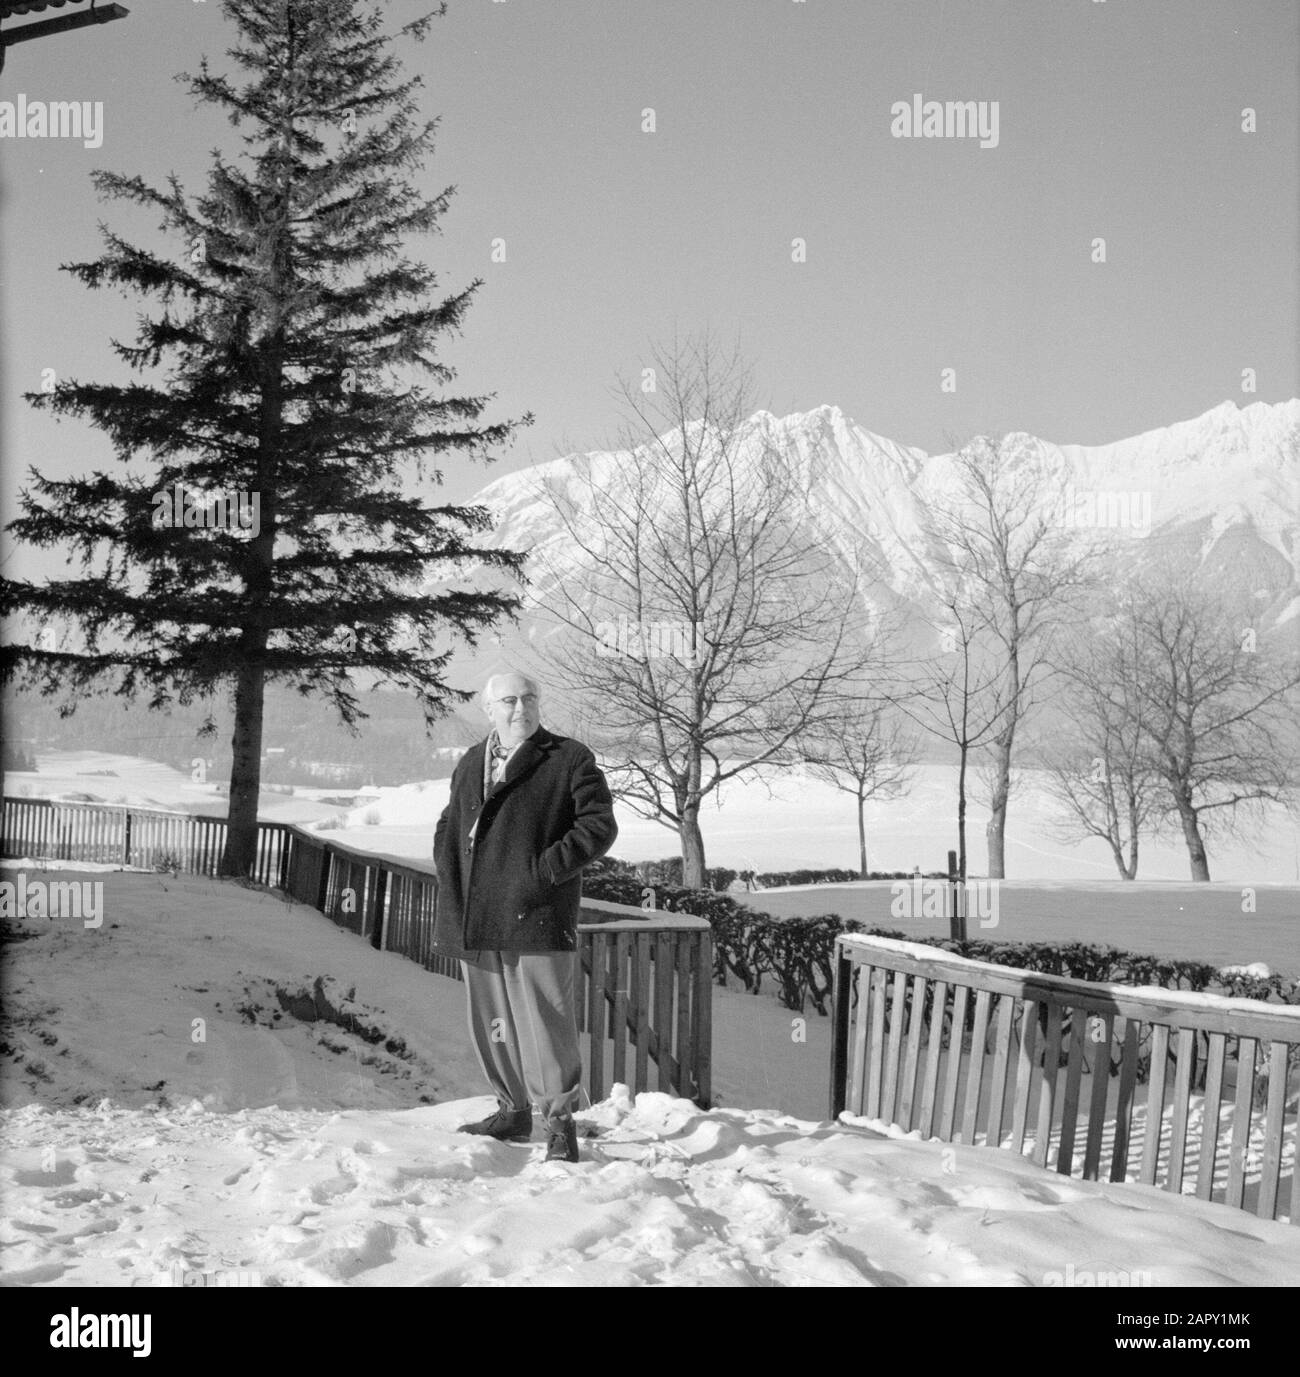 Winter in Tyrol  Willem van de Poll poses in the snow with in the background the Karwendel Mountains Date: January 1960 Location: Austria, Sistrans, Tyrol Keywords: mountains, landscapes, snow, holiday, winter Personal name: Poll, William van de Stock Photo